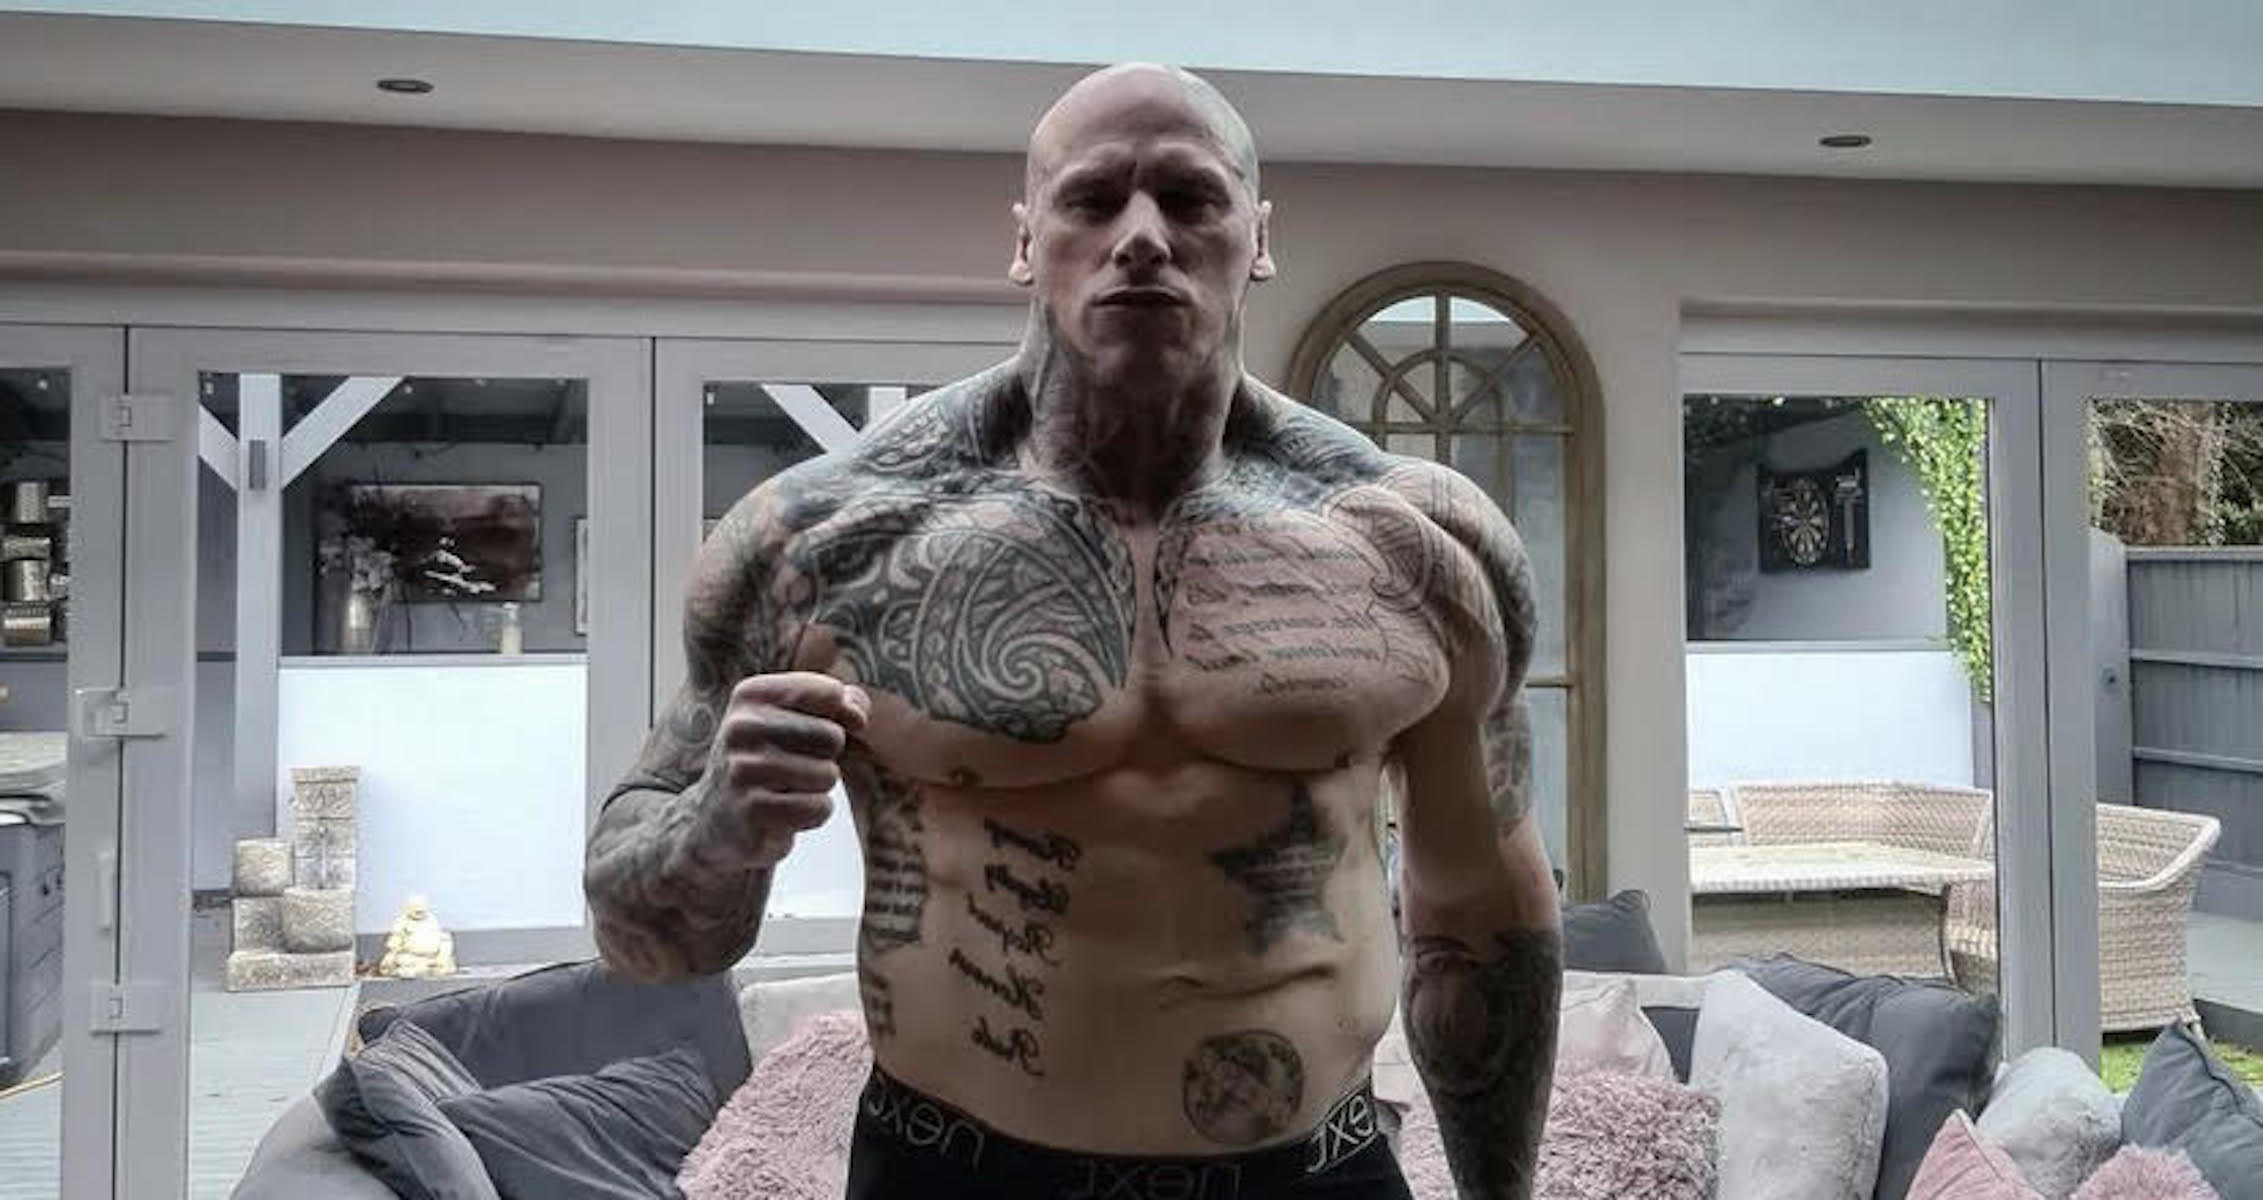 Martyn Ford Shares Current Weight Of 315 Pounds Ahead Of Fight Against Iranian Hulk